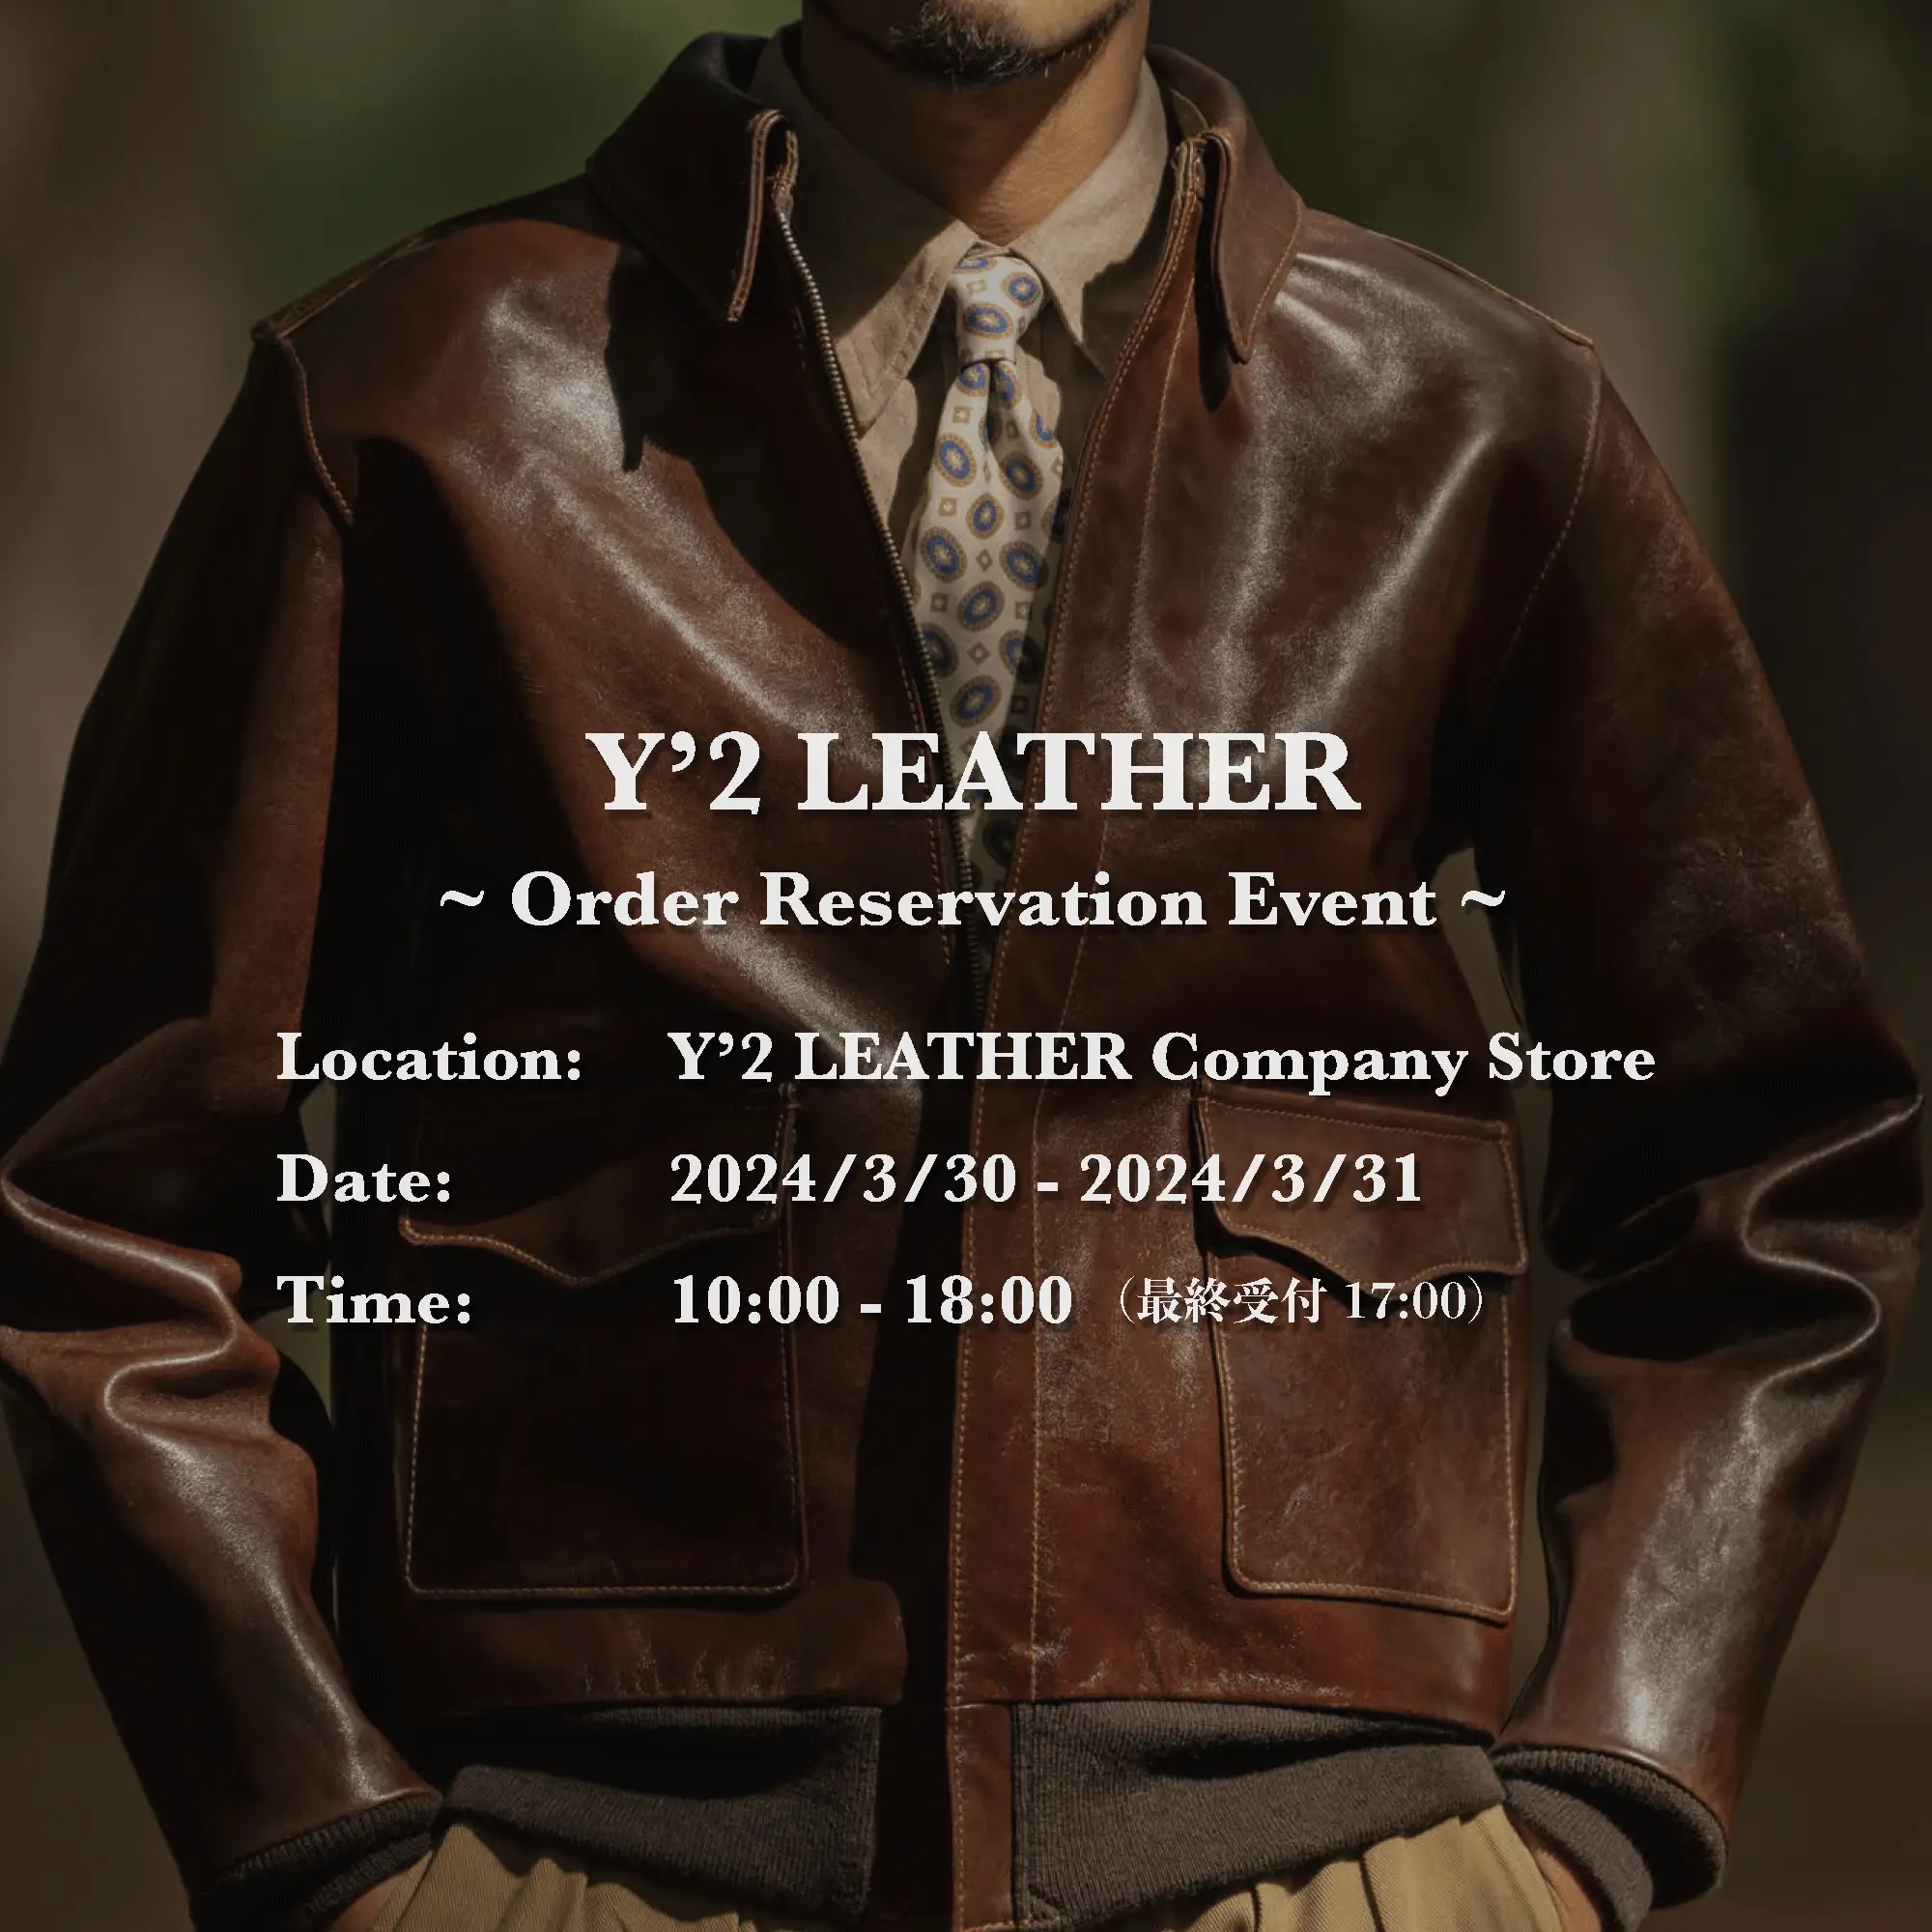 Y'2 LEATHER Pre-reservation event information leather jacket brand